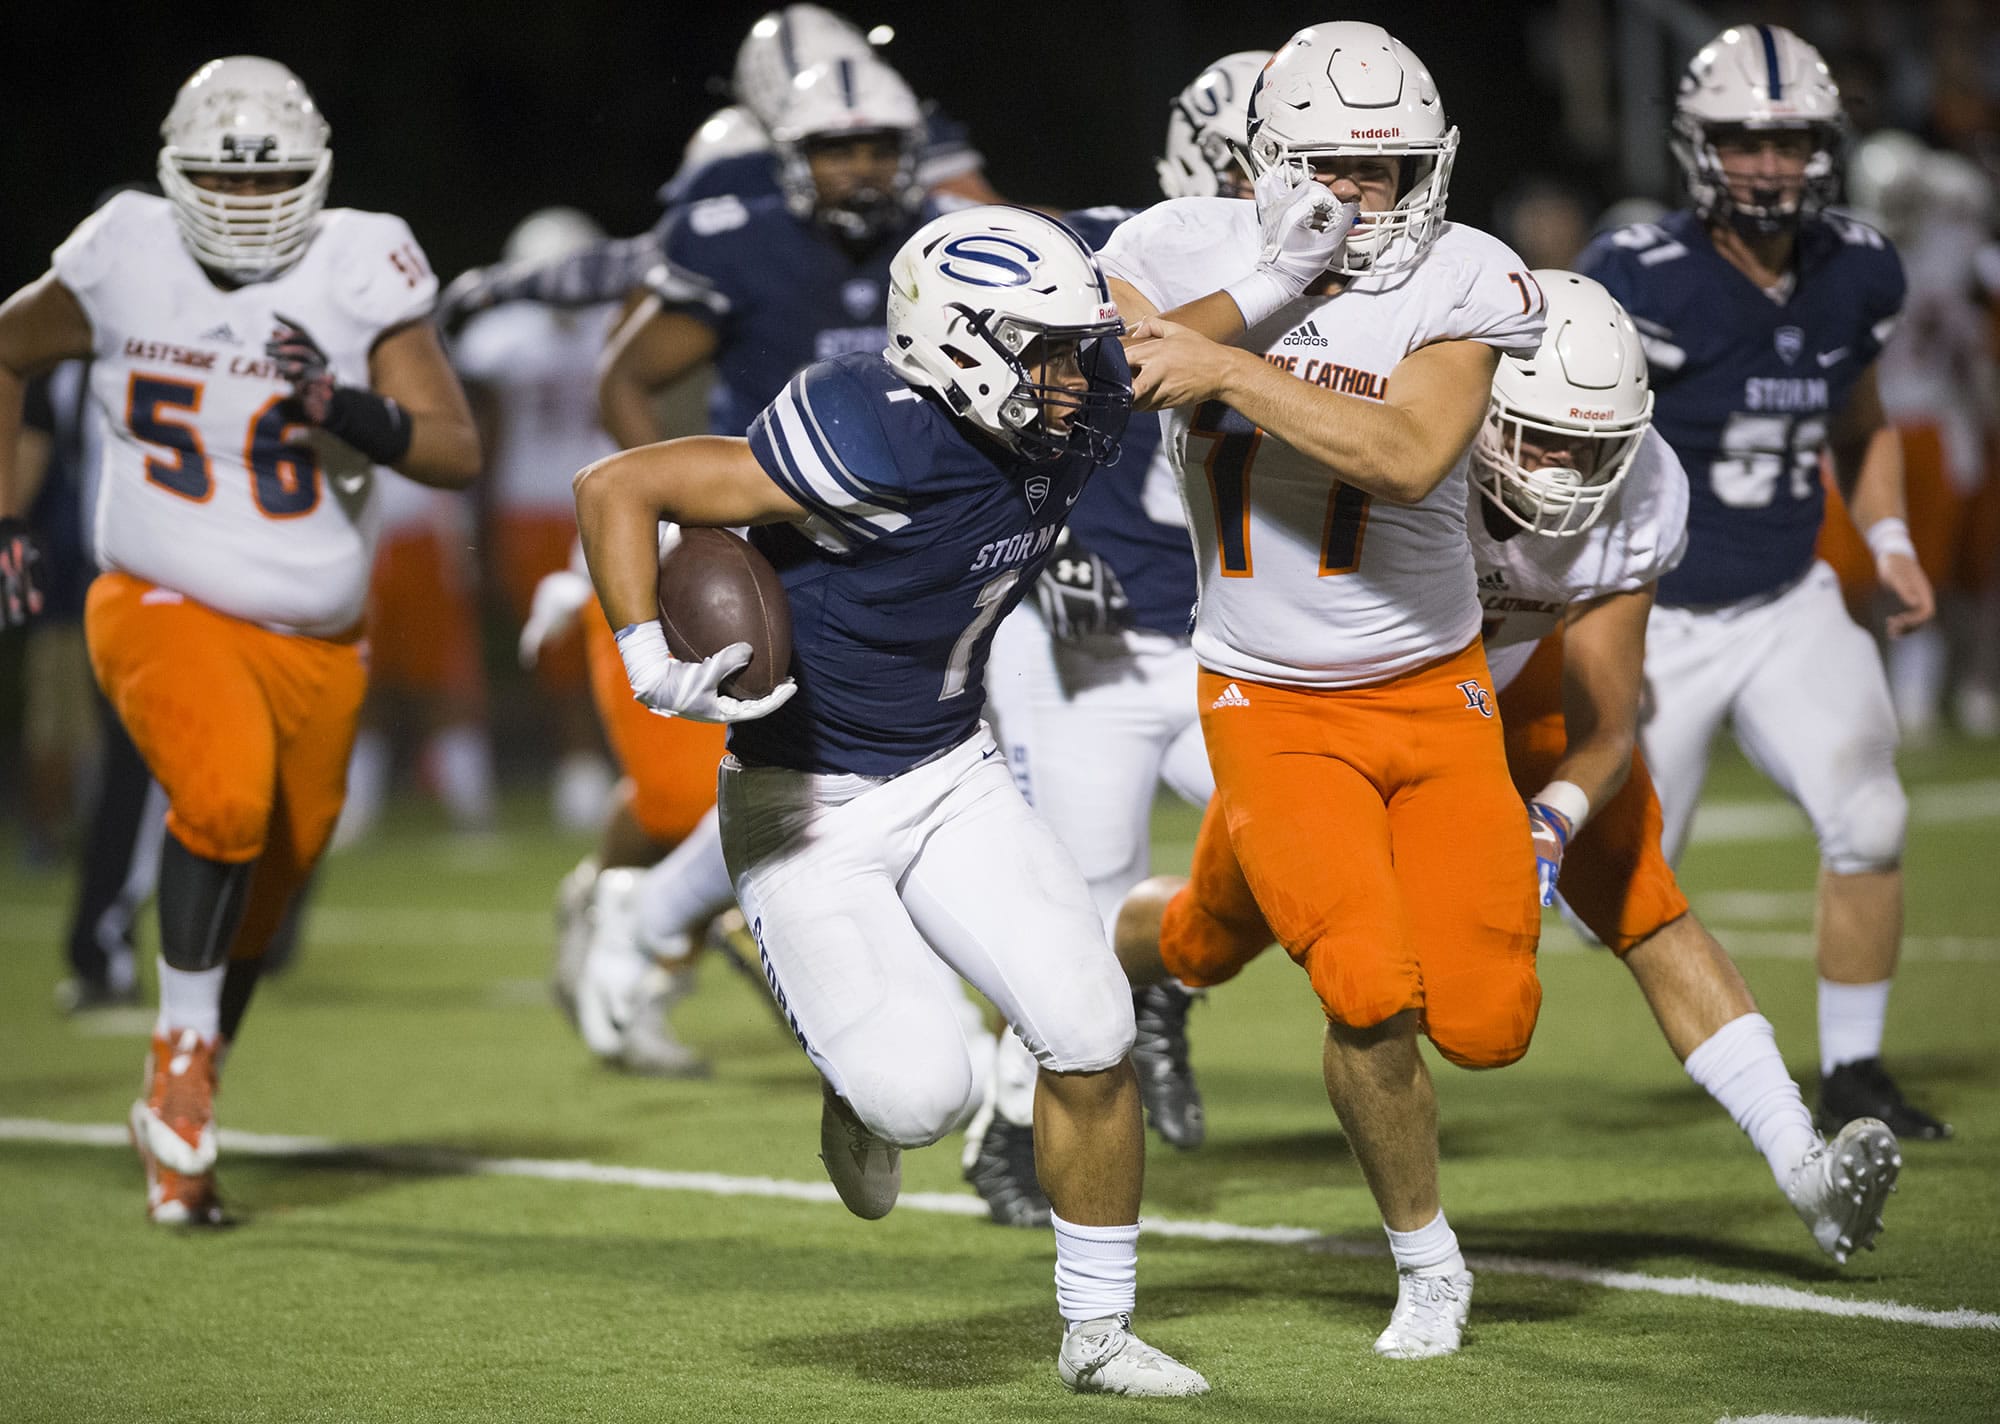 Skyview’s Angelo Sarchi (1) fights off Eastside Catholic’s Ryan Taylor (77) during the first quarter at Kiggins Bowl, Friday evening, September 8, 2017.